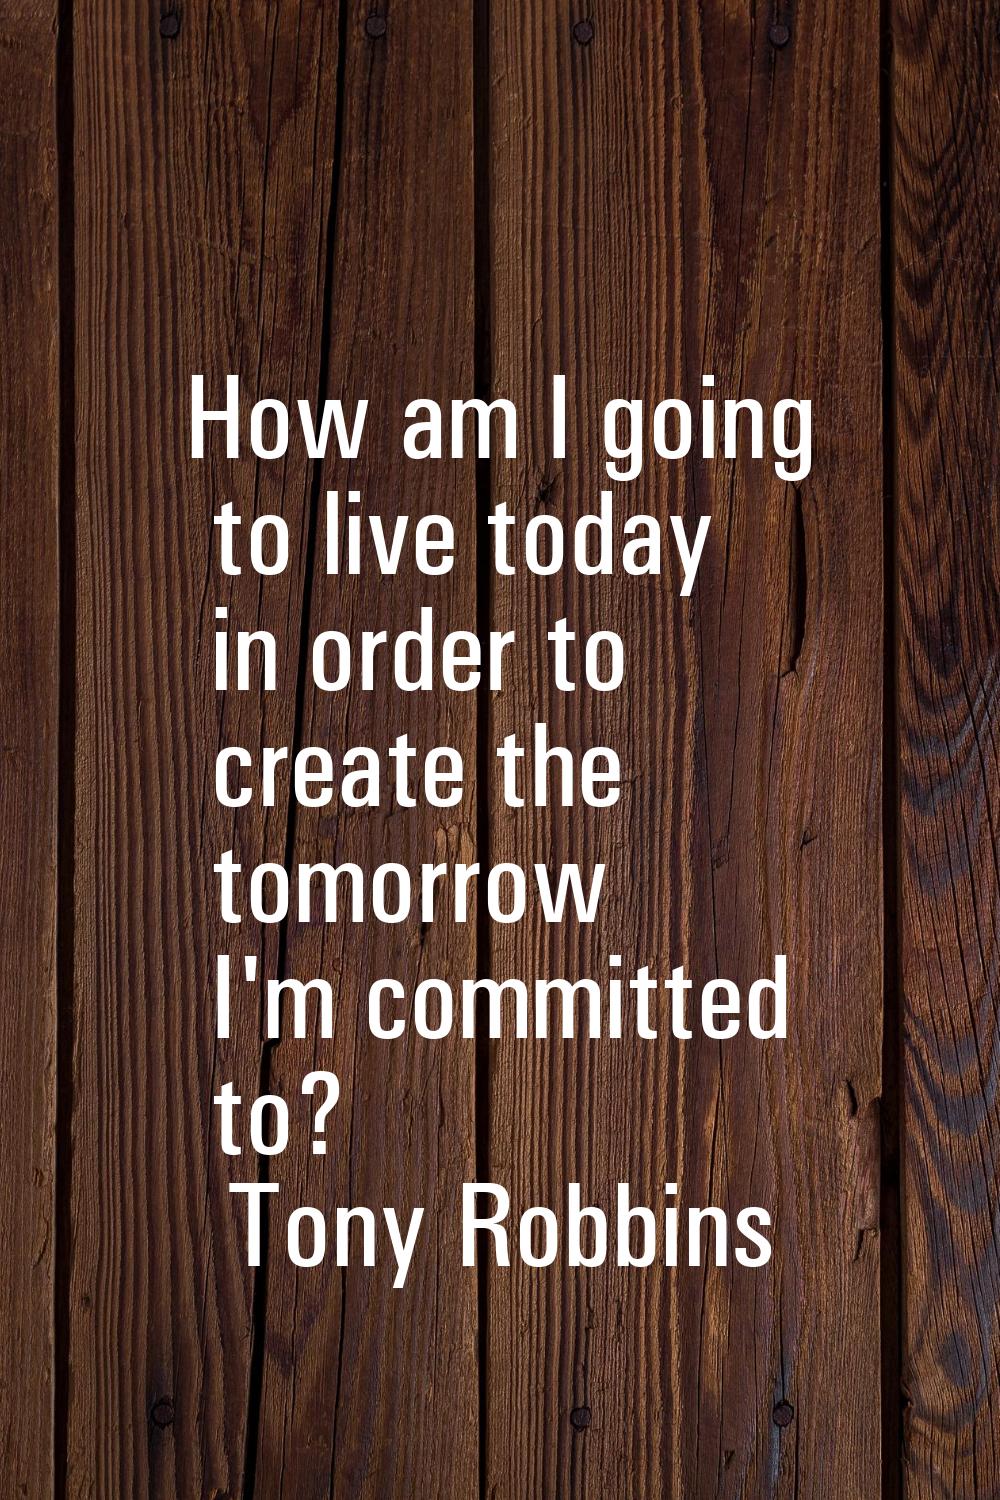 How am I going to live today in order to create the tomorrow I'm committed to?